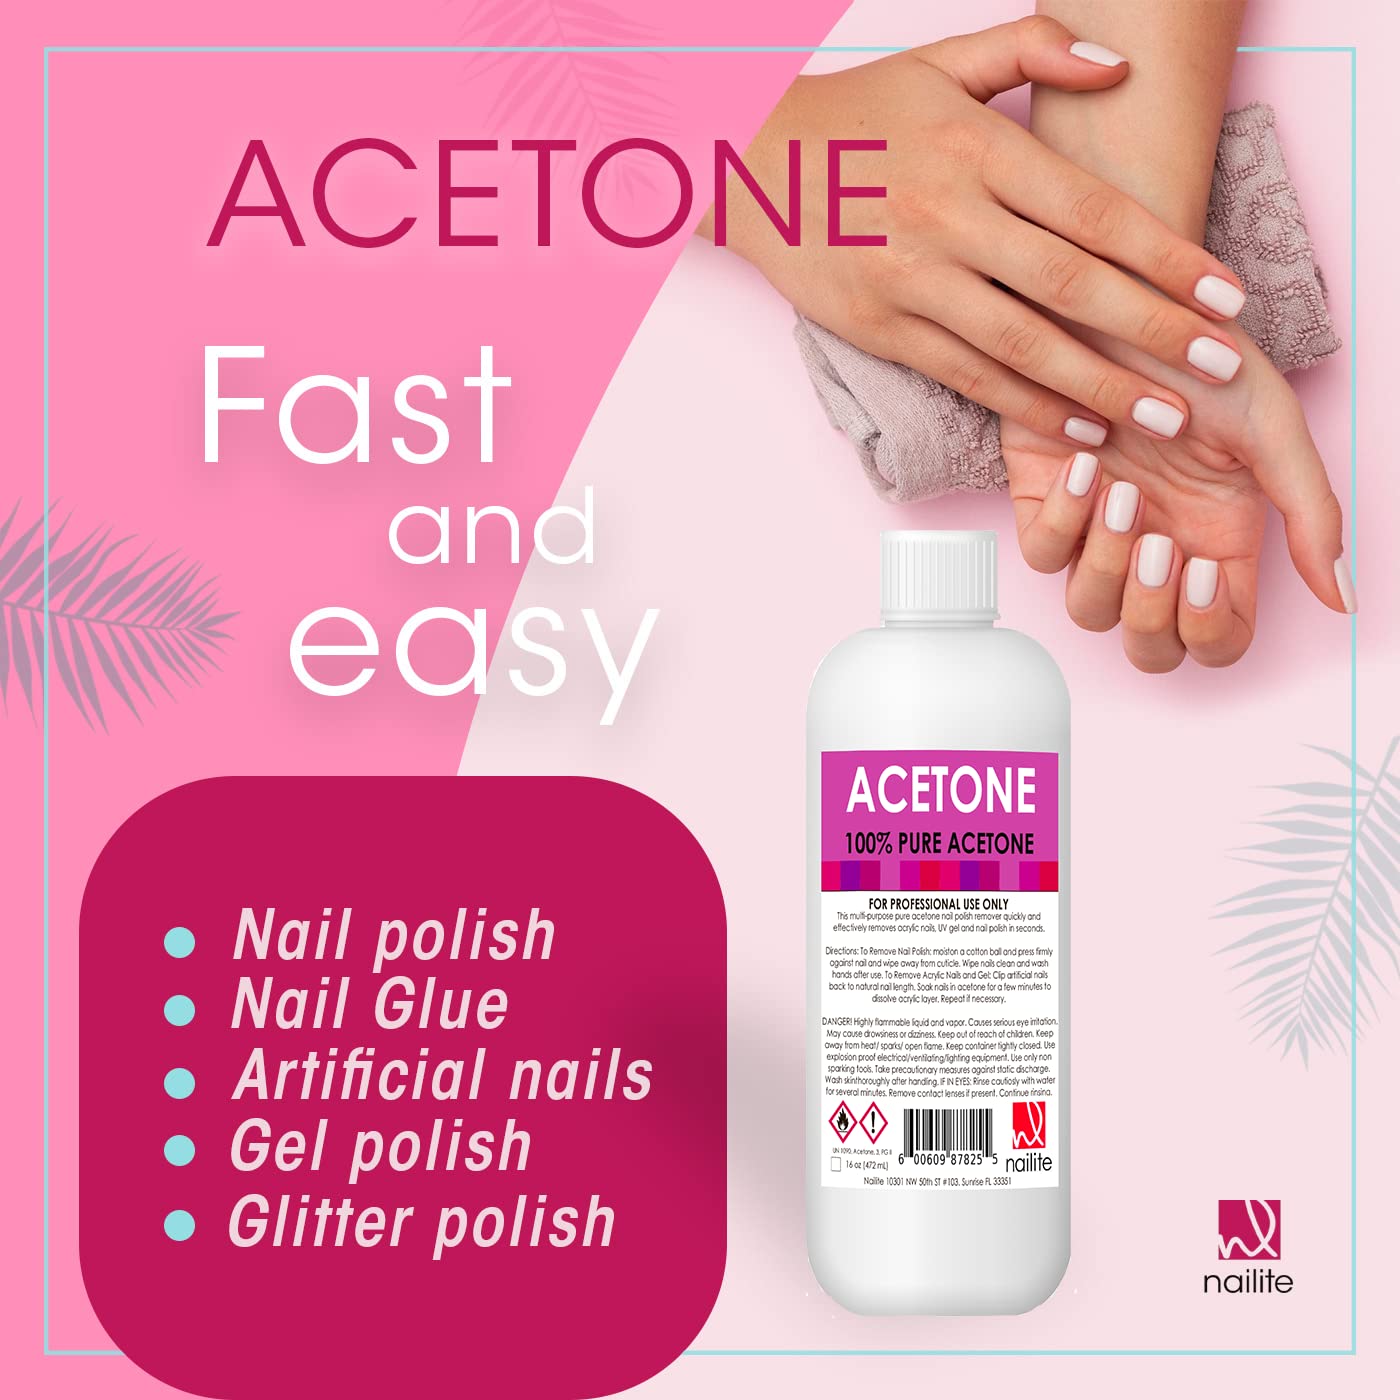 Nailite Nail Polish Remover - 100% Pure Acetone, Quick Professional Ultra-Powerful Remover, for Natural, Gel, Acrylic, Shellac N